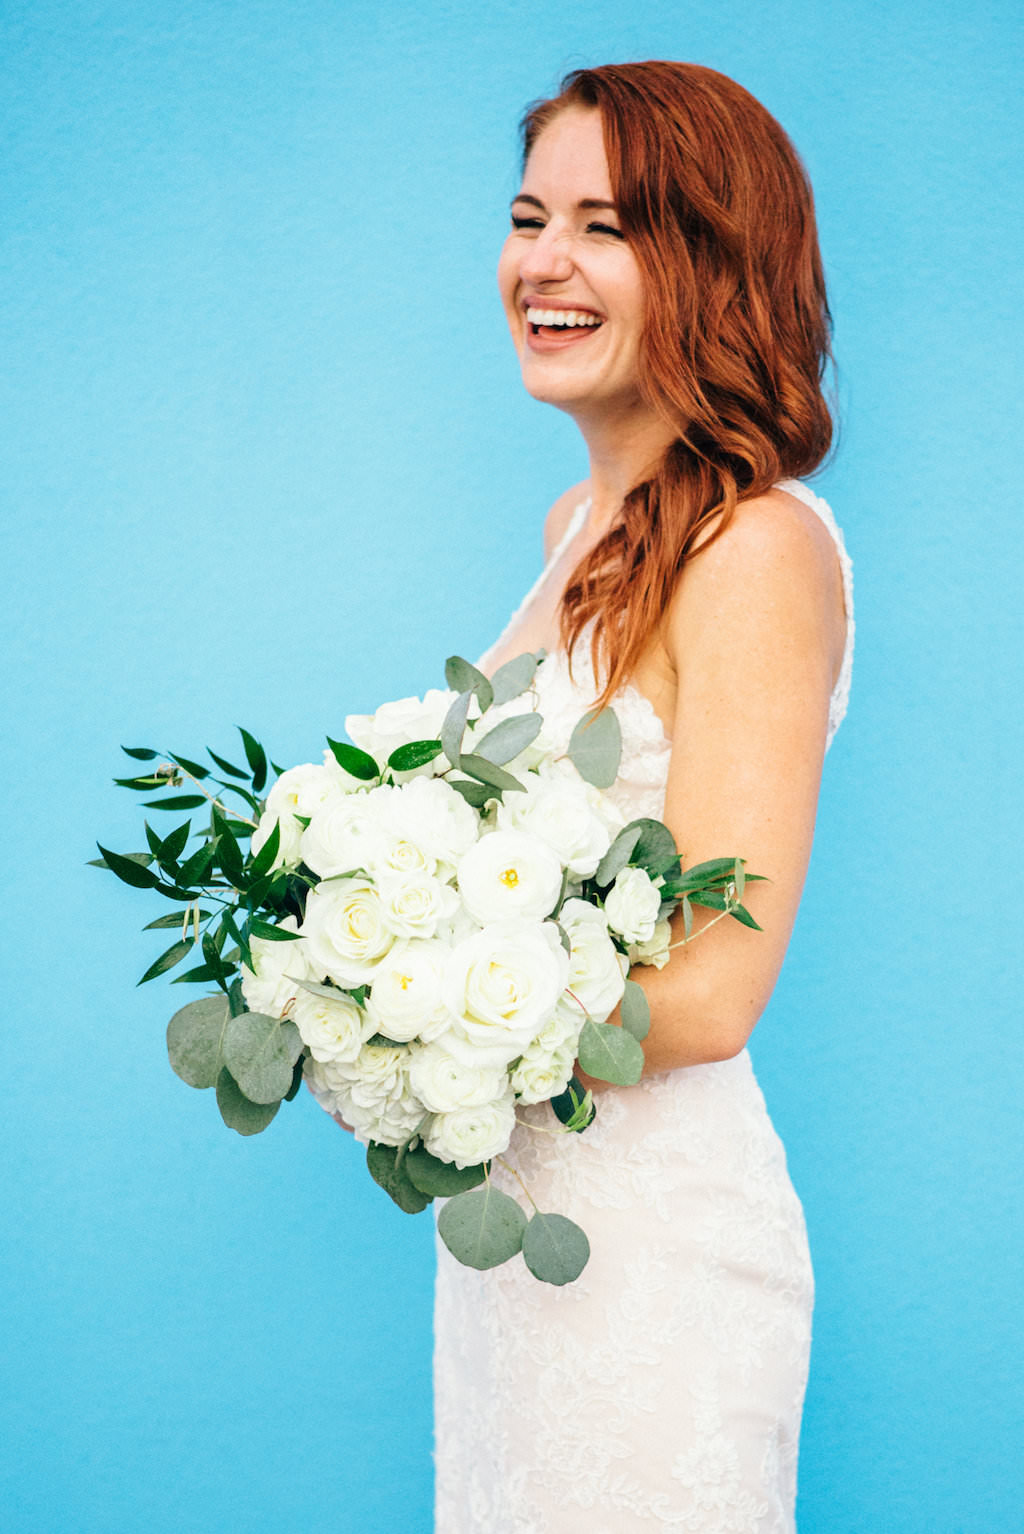 Outdoor Bridal Portrait with White Floral and Greenery Bouquet